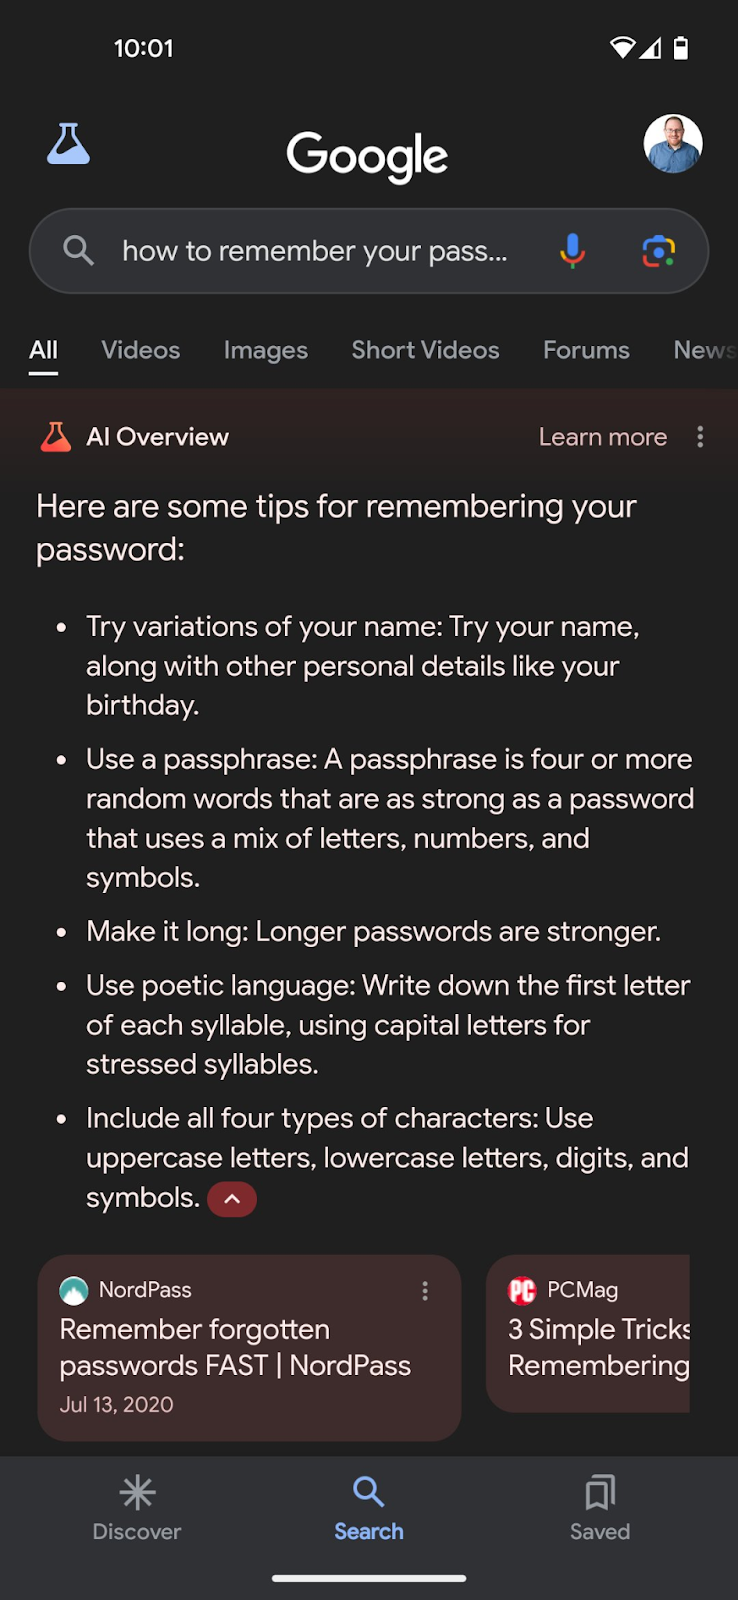 how to remember your password - bad Google ai overview